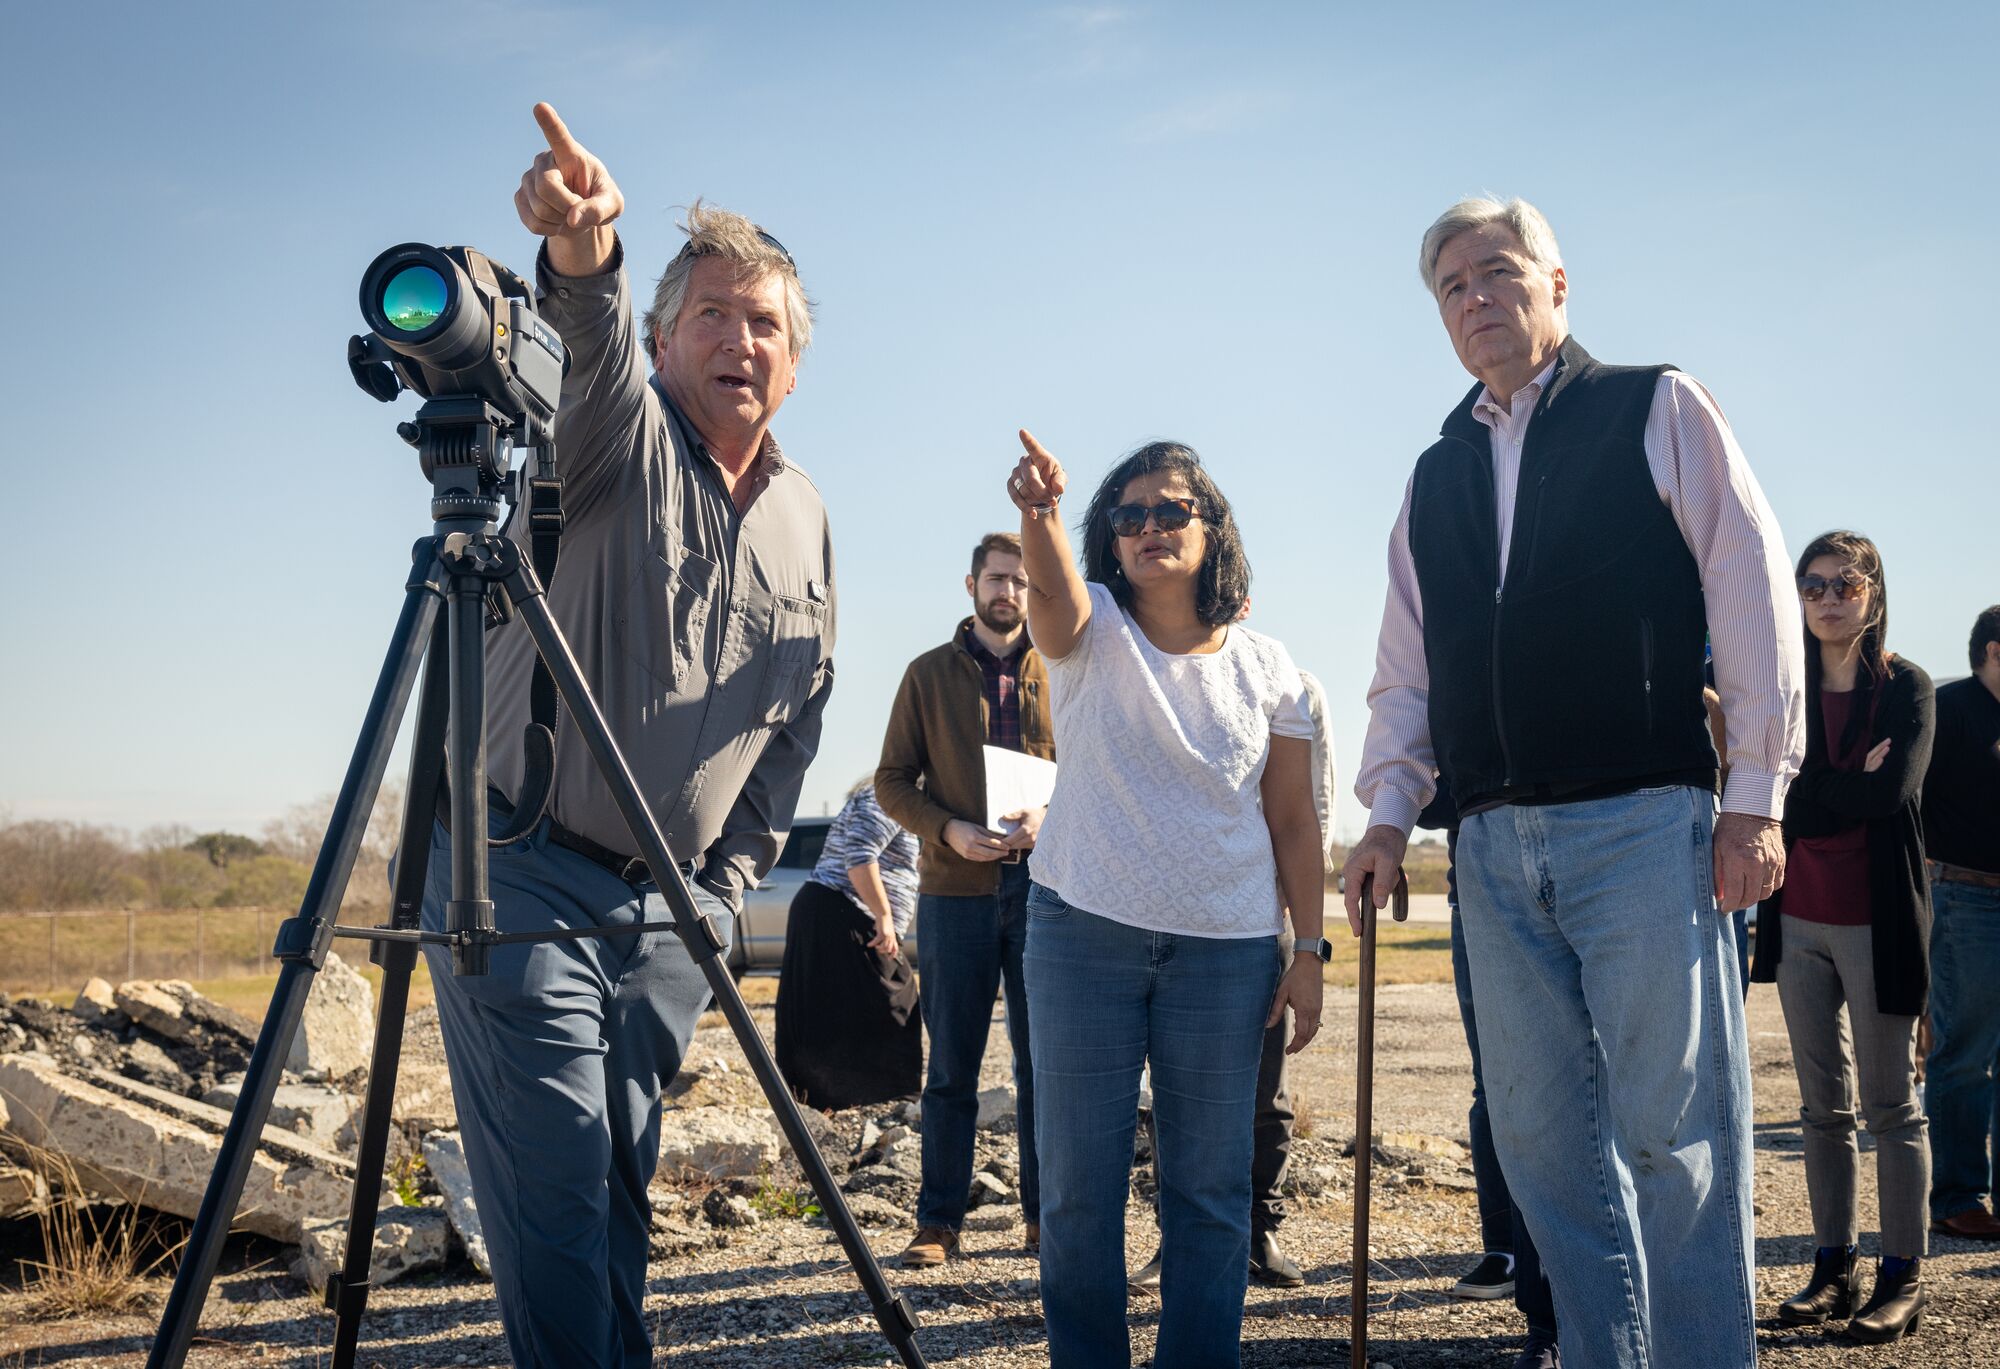 Sen. Sheldon Whitehouse (right) and Rep. Pramila Jayapal (center) use an optical gas imaging camera with infrared sensors to see fugitive gas leaks from industrial operations during a "Toxic Tour" of polluting facilities in Port Arthur, TX.